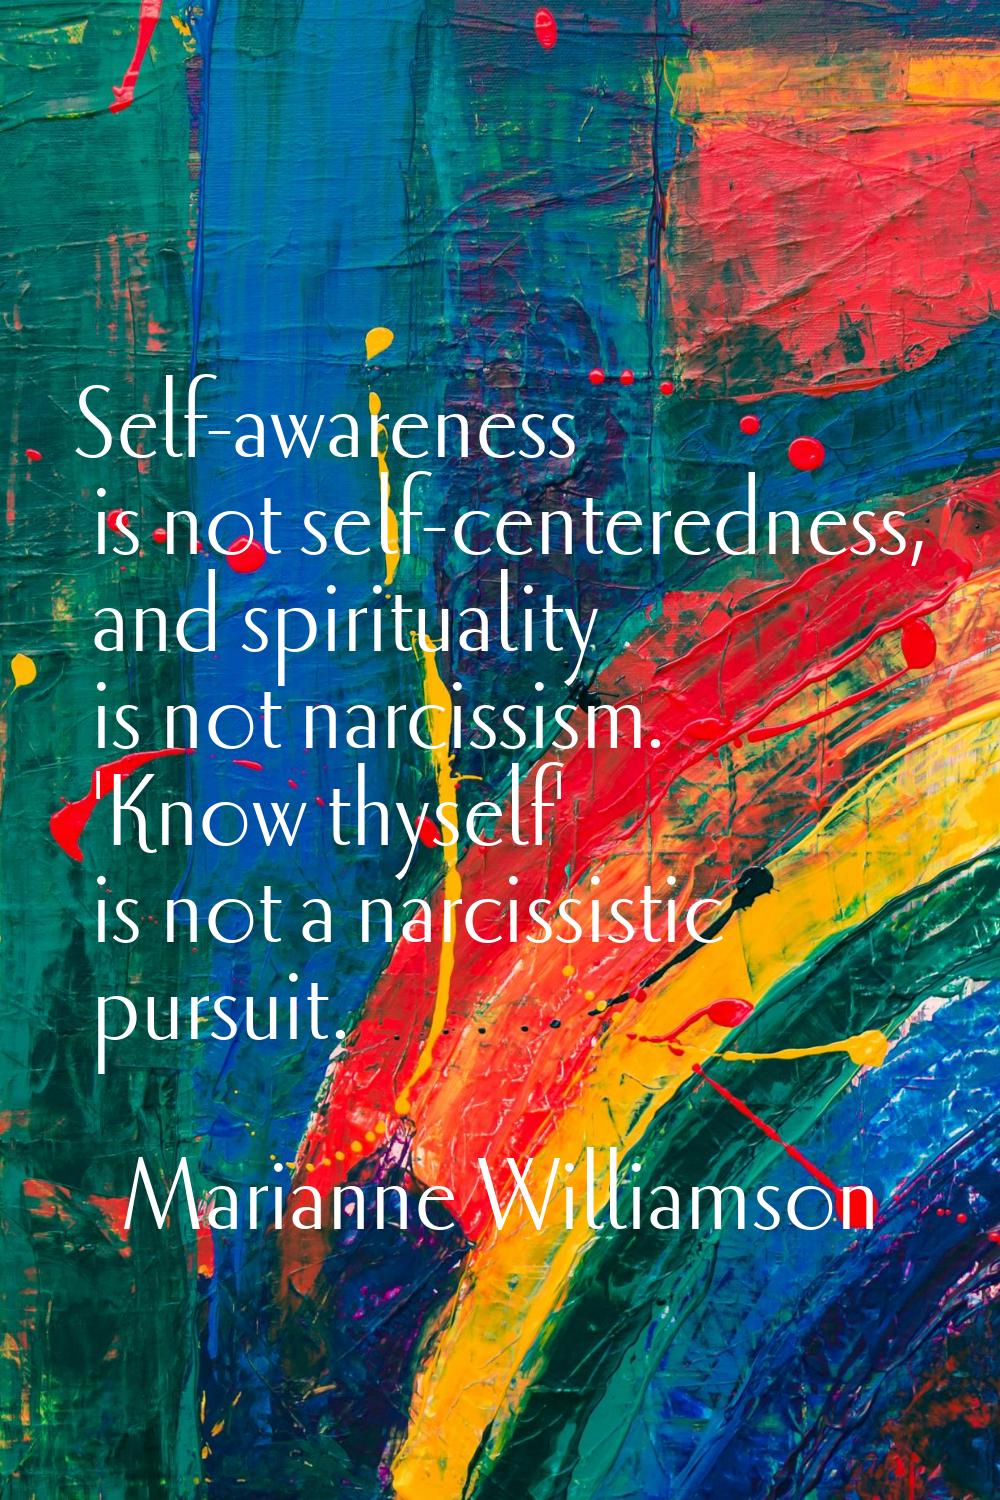 Self-awareness is not self-centeredness, and spirituality is not narcissism. 'Know thyself' is not 